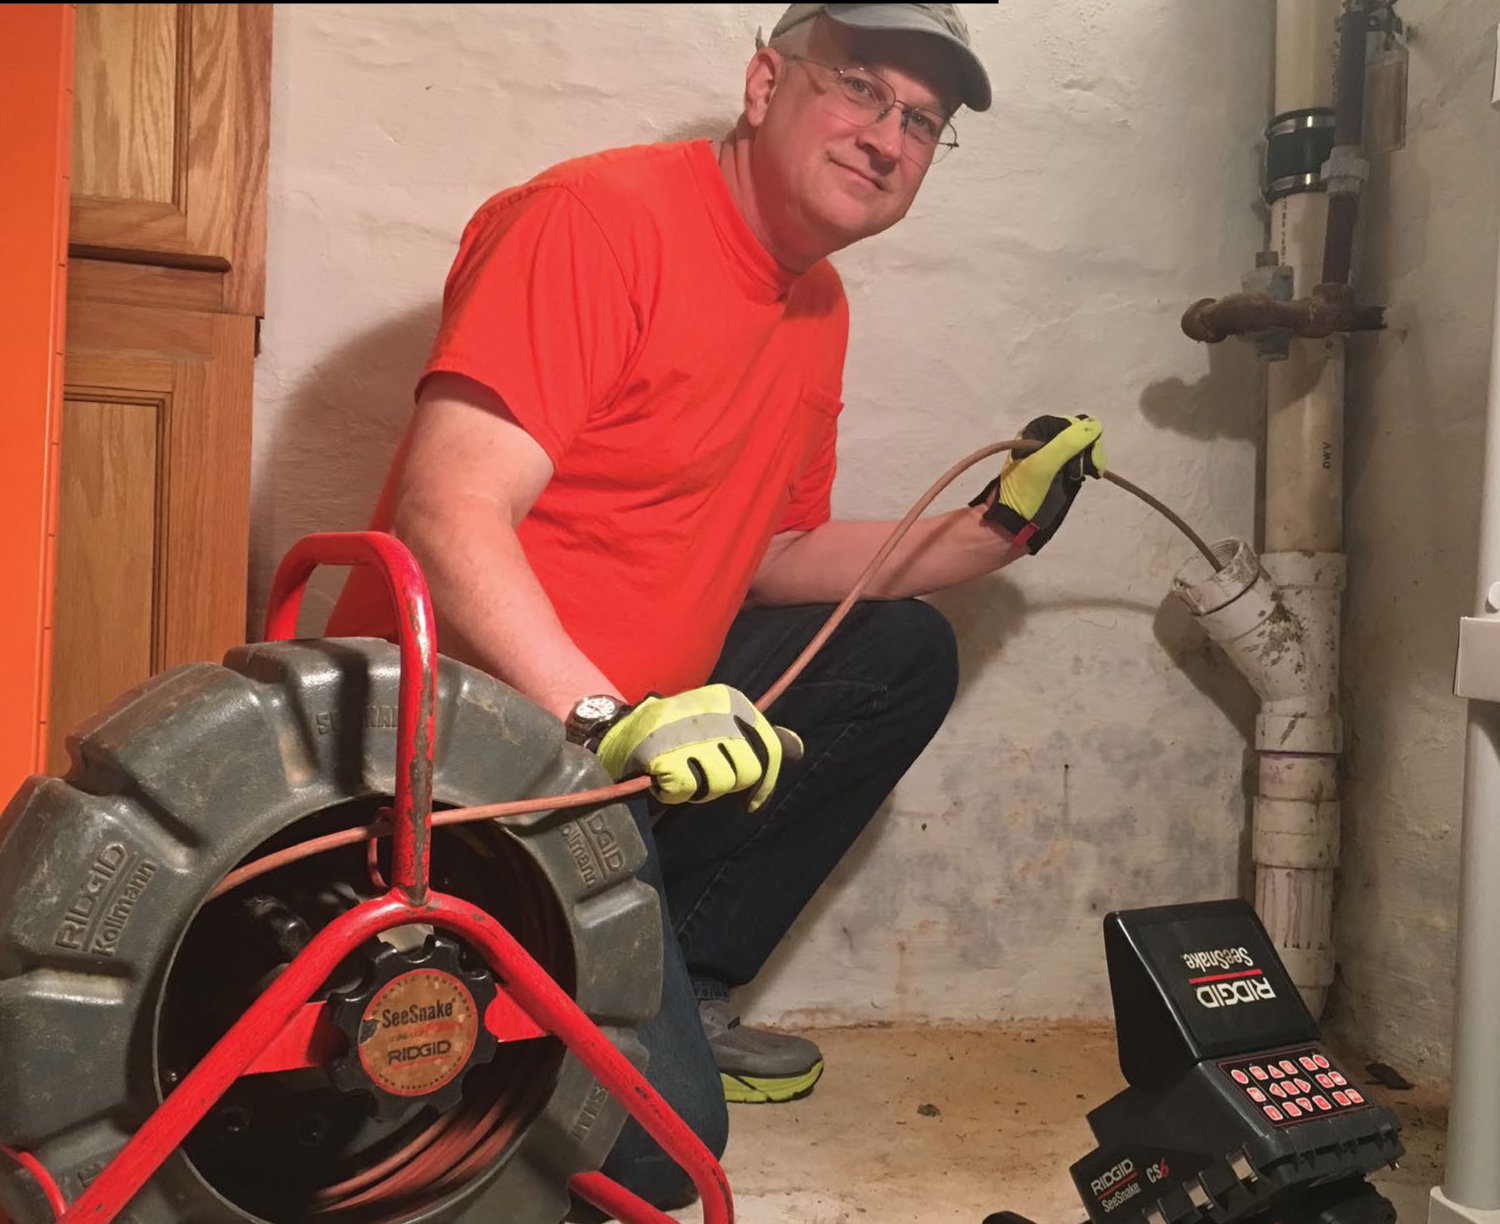 Inspection Equipment Is Essential For Plumber Frank Taciak